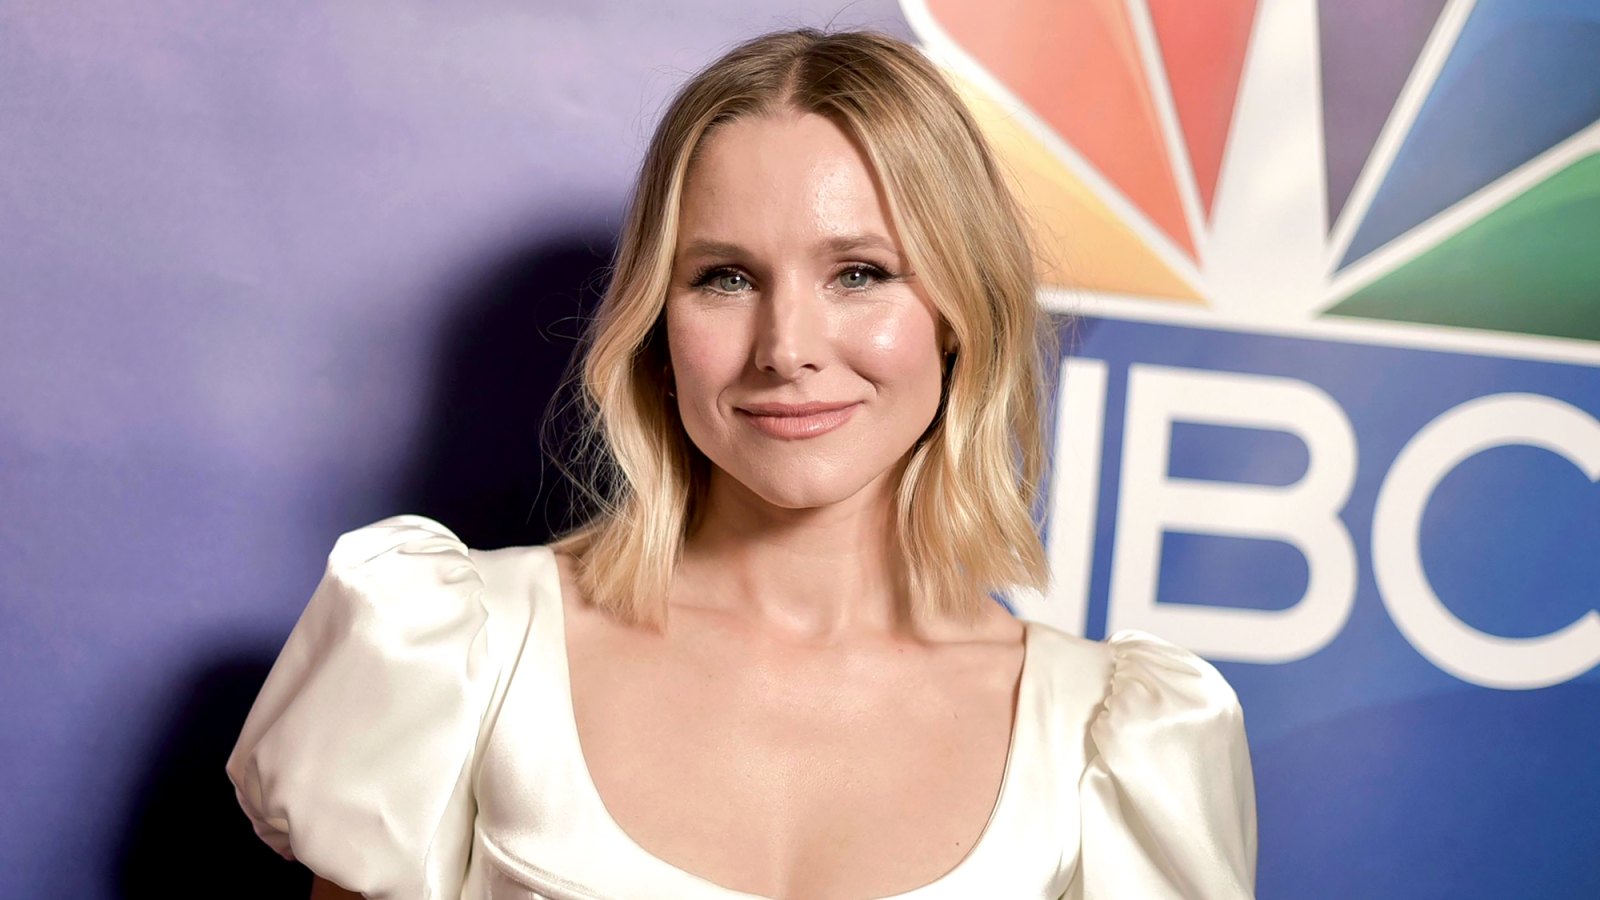 Kristen Bell's Kids Made Their Own Breakfast and It Went Hilariously Wrong: 'I Might Not Be Doing This Right'